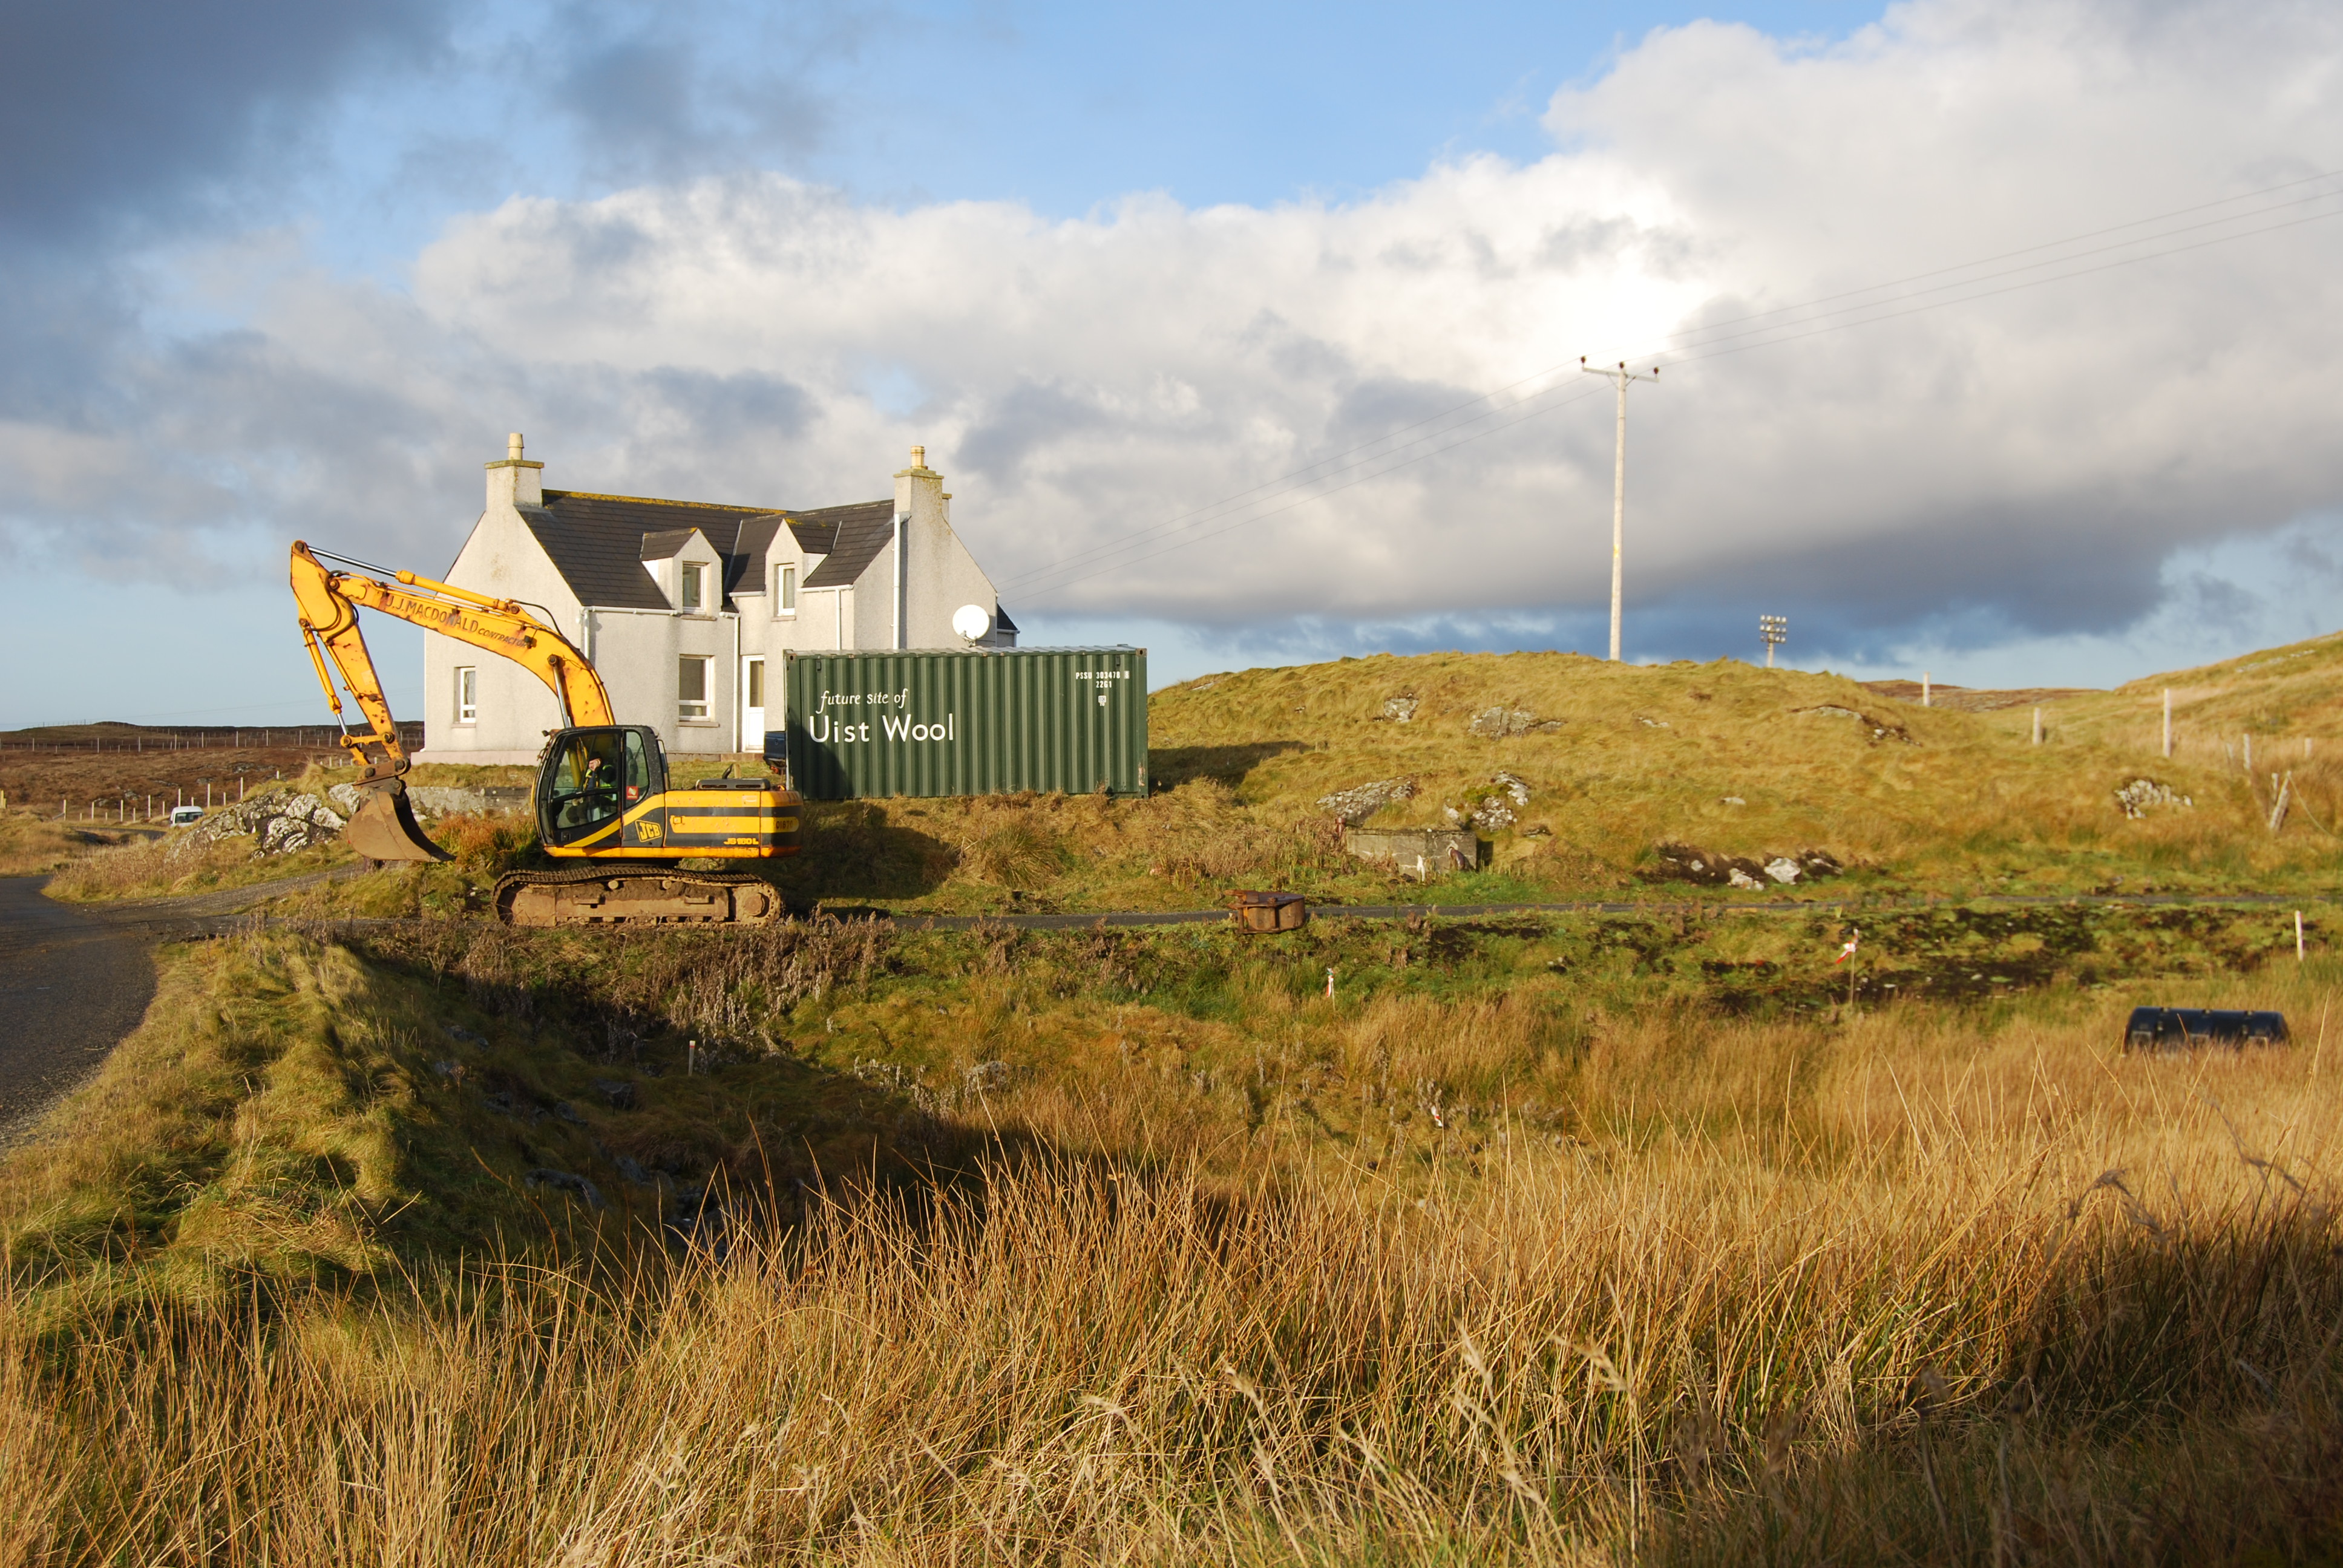 uist-6-construction-starts-on-the-mill-10-december-2012-the-house-was-the-base-for-uist-wool-2012-16